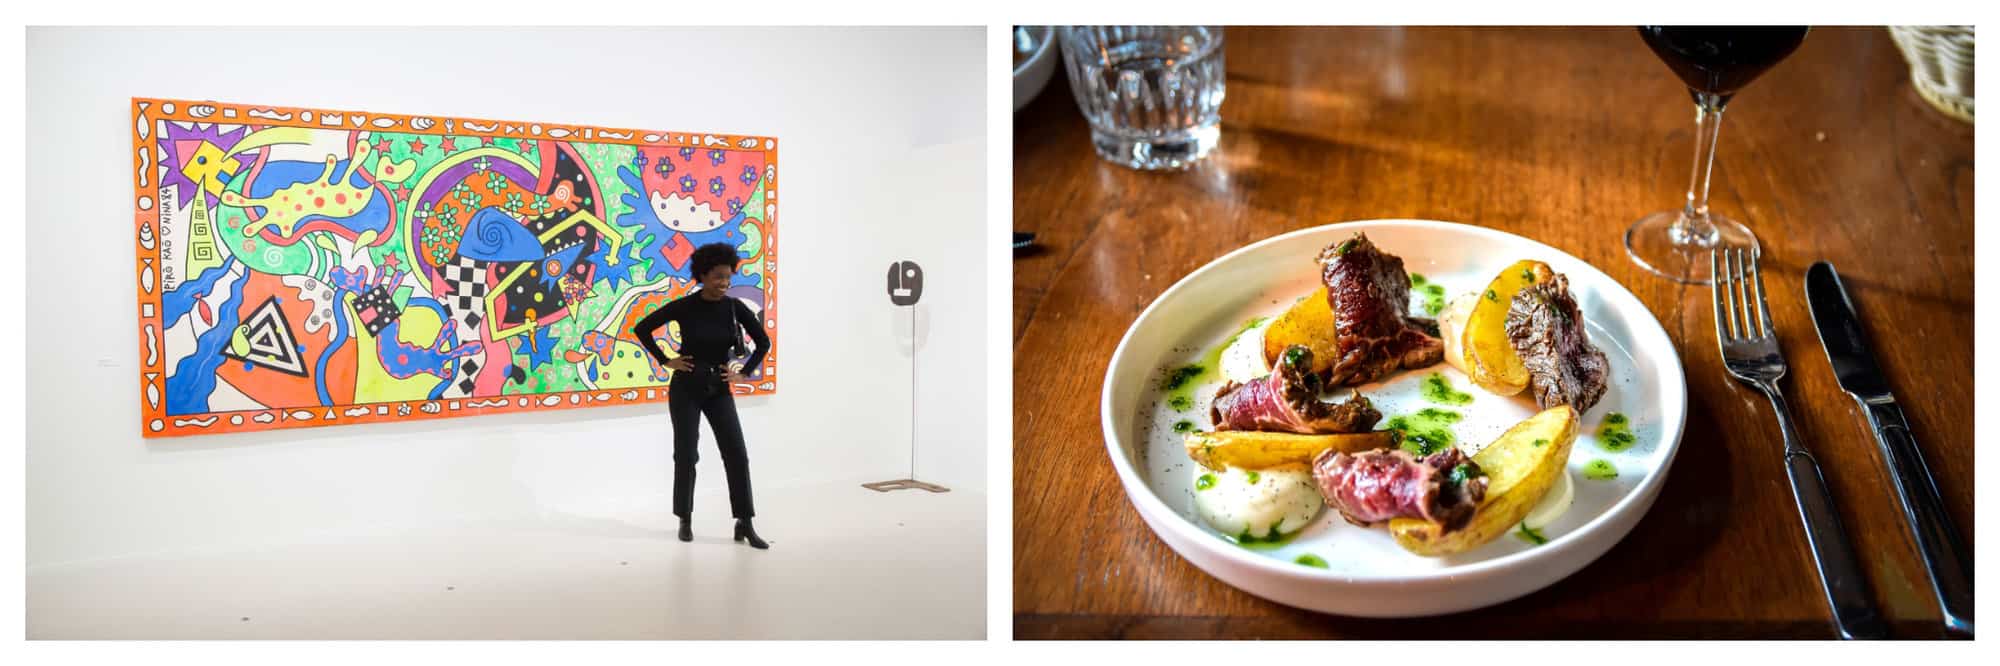 Left: A woman standing in front of a modern art painting with green, blue, orange, and yellow shapes. There is a mask on a stand in the right corner. Right: A plate of beef in a white sauce with potatoes and a green garnish. There is a fork and a knife to the right of the plate and a glass of wine in the right corner